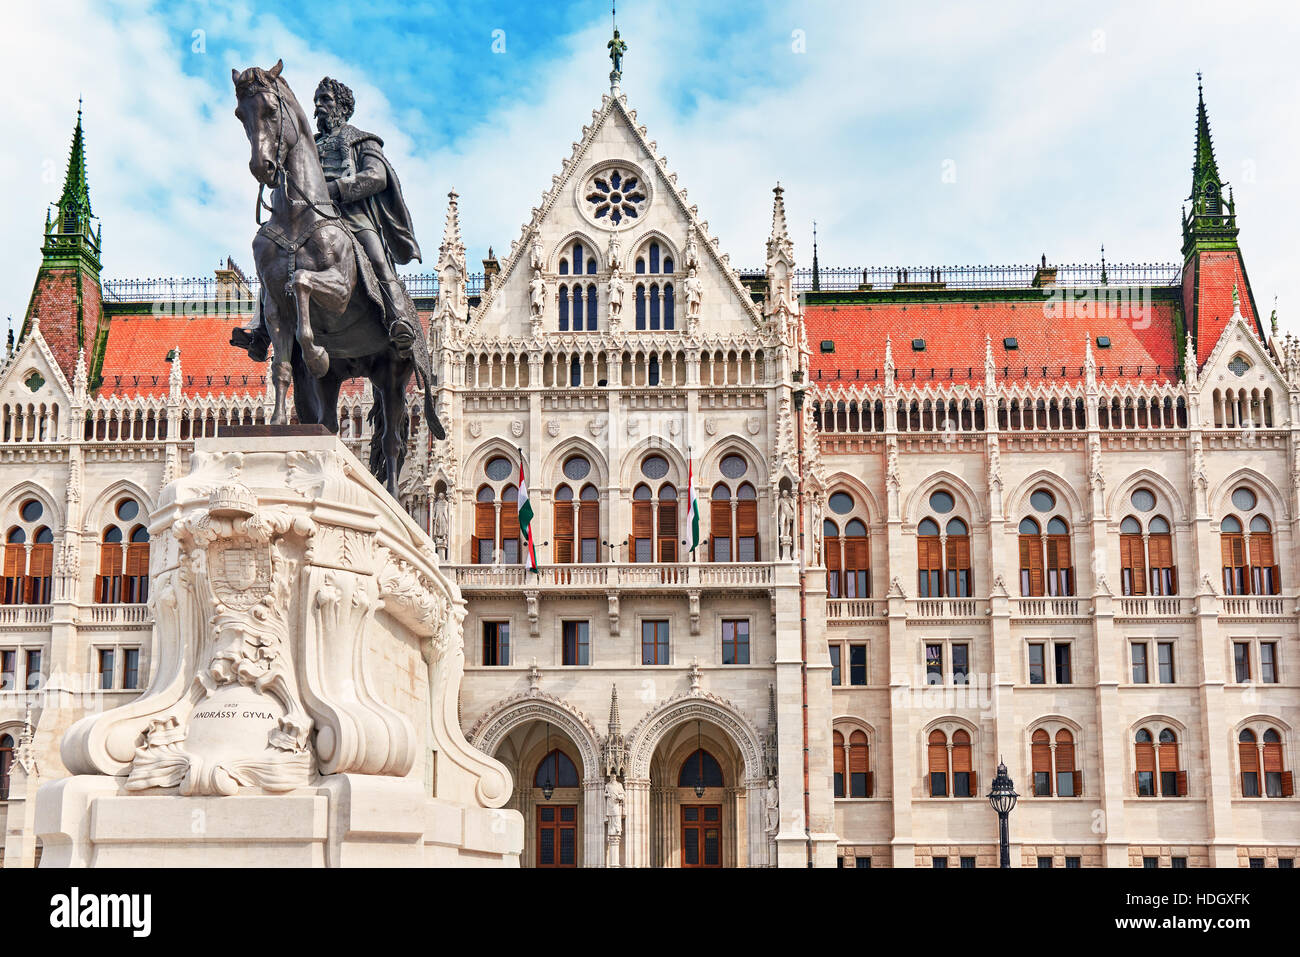 Hungarian Parliament  with statue Andrassy Gyvla. Budapest. Stock Photo